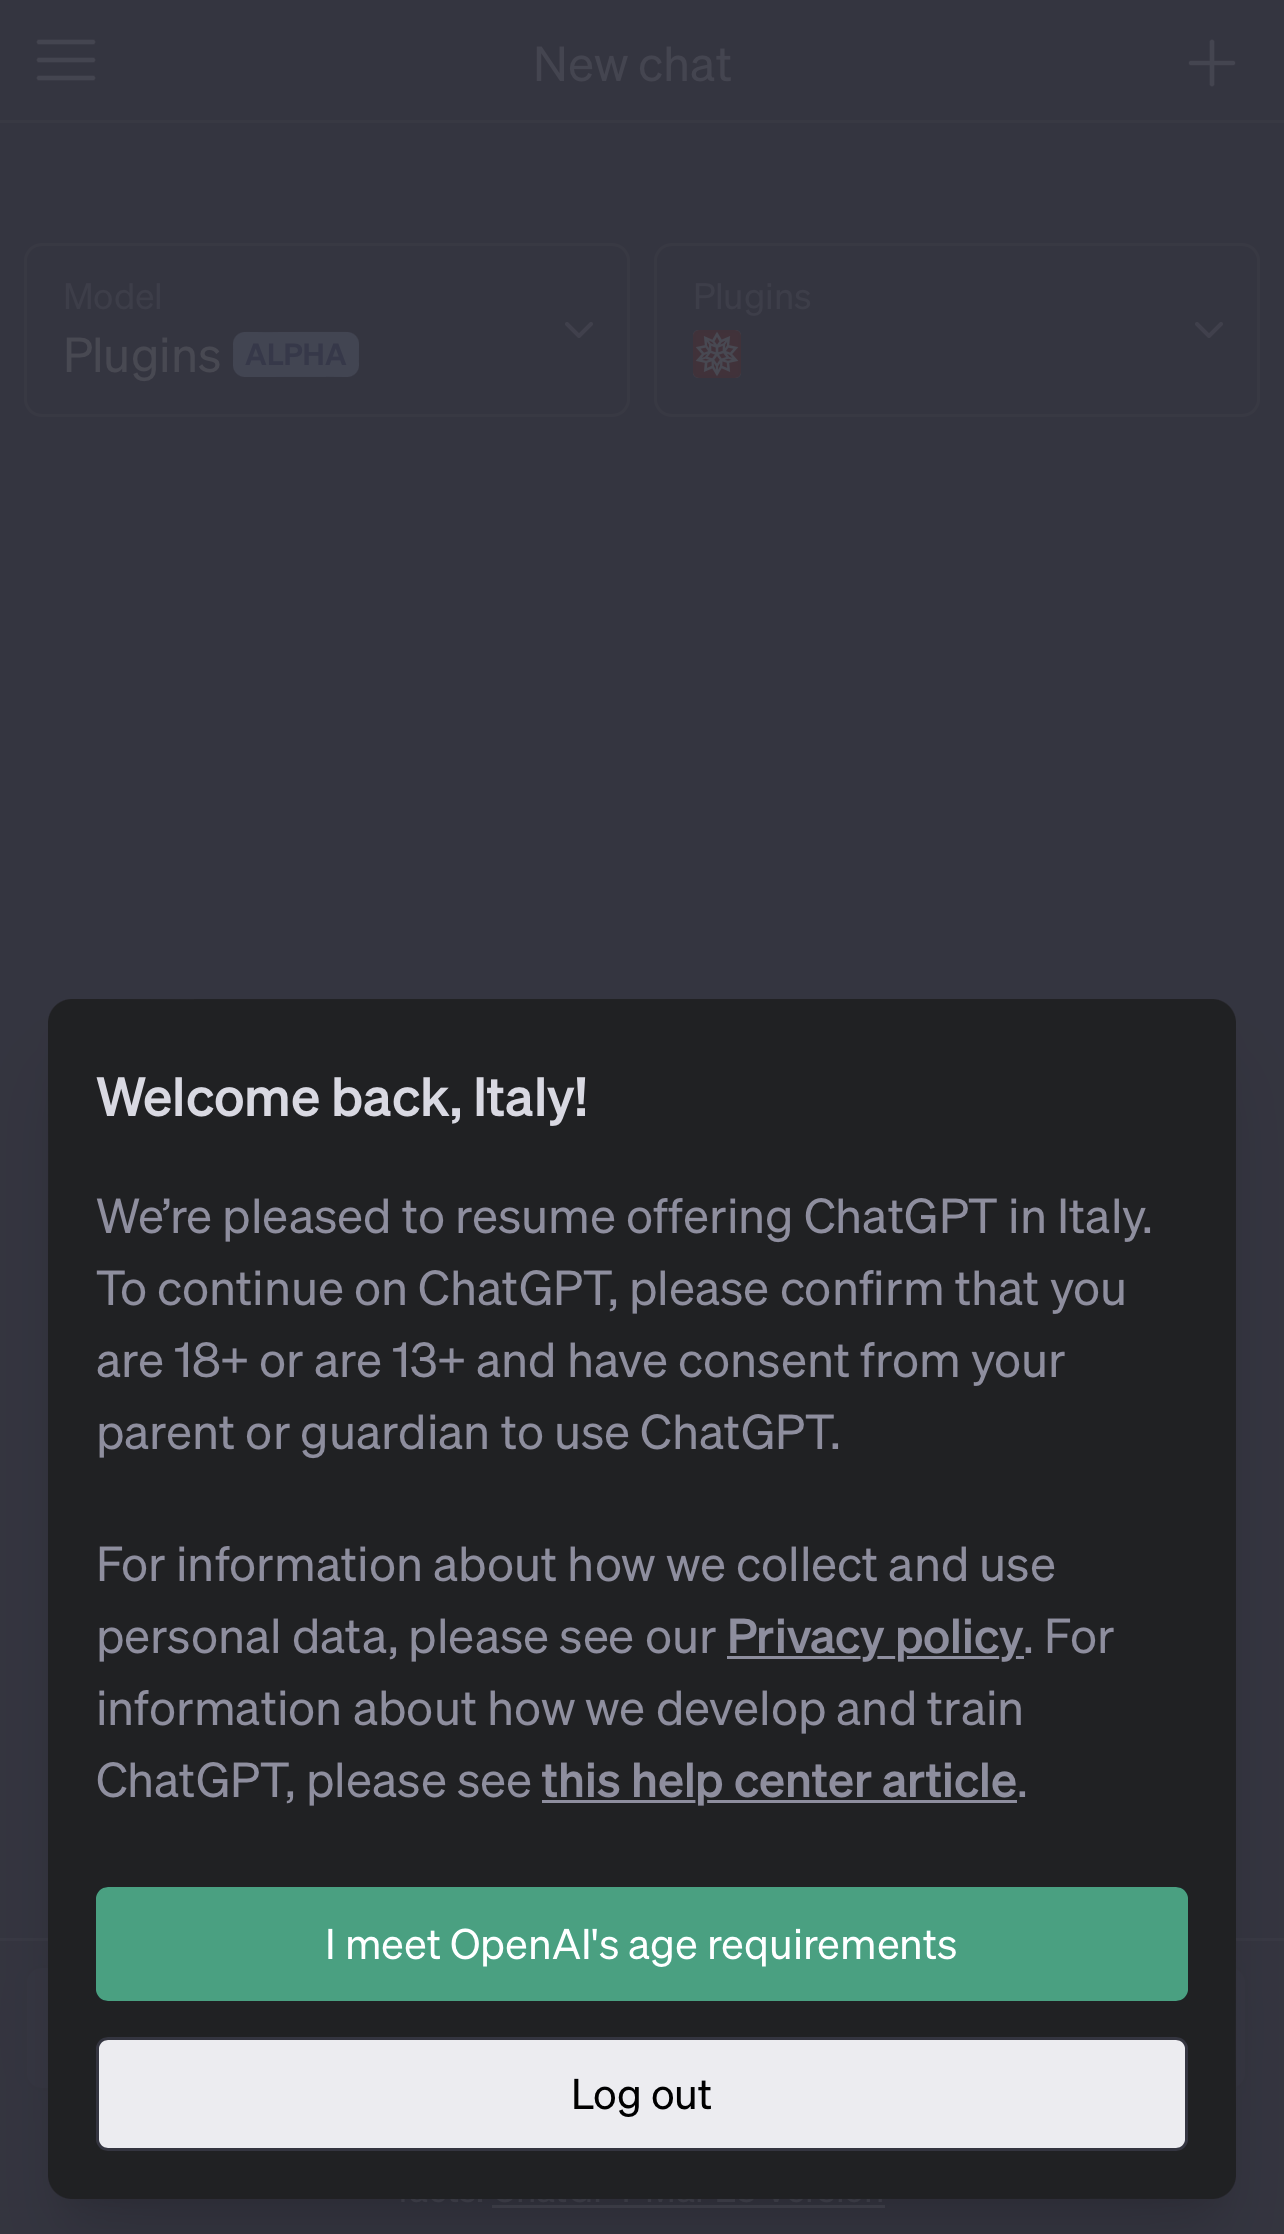 ChatGPT Ban Lifted: OpenAI Complies With Italian Privacy Regulations As EU AI Act Moves Forward